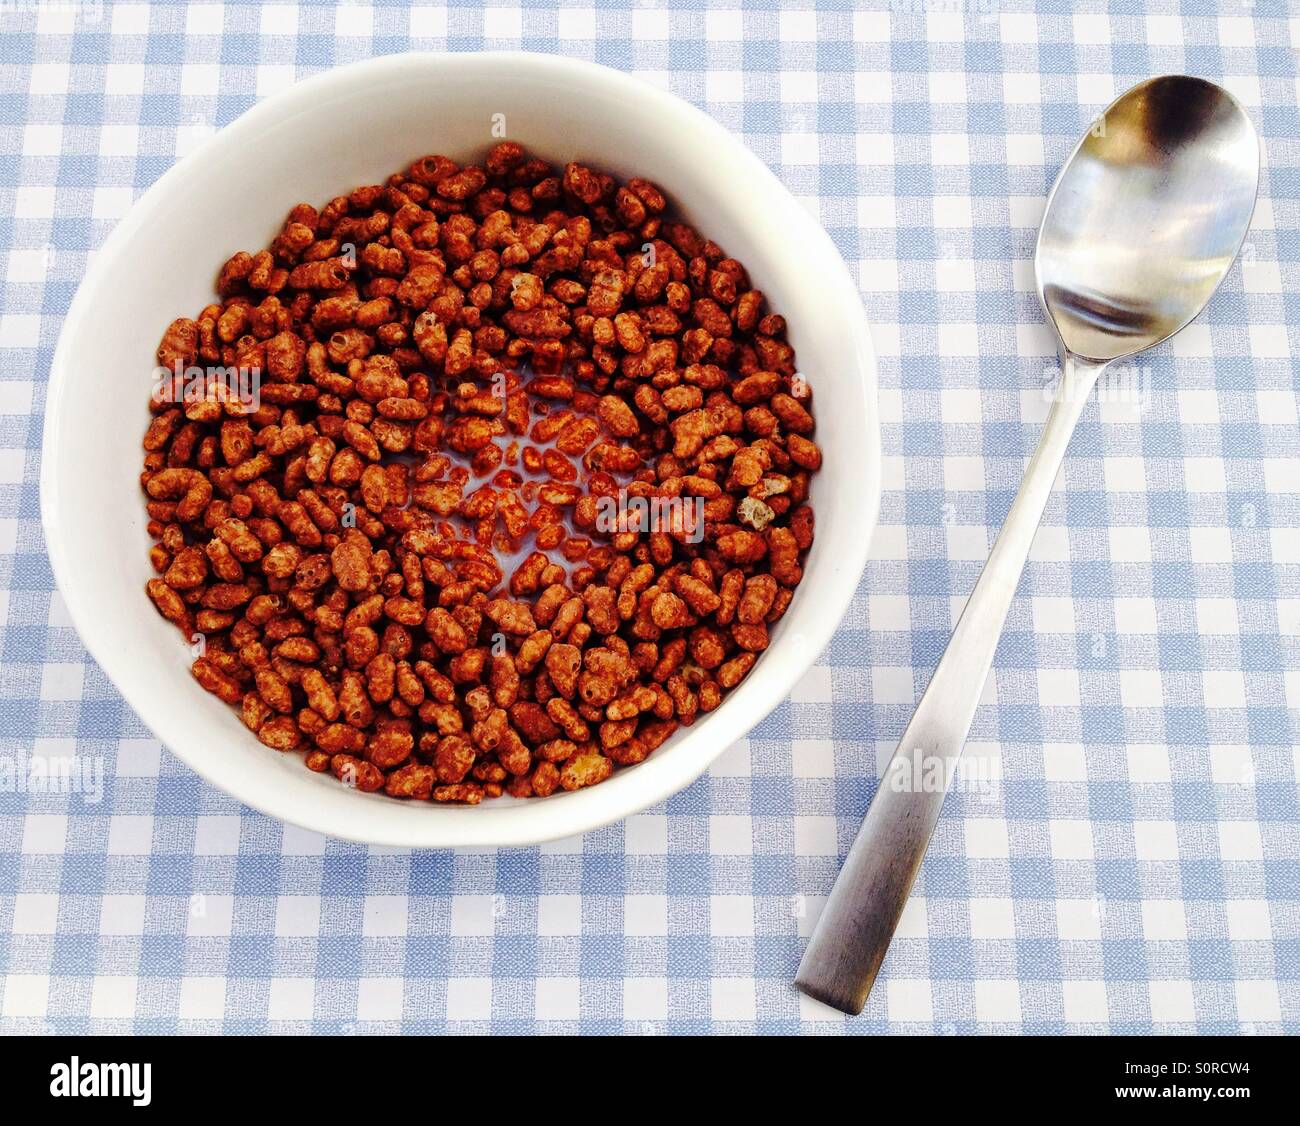 Bowl of Kellogg's coco pops toasted rice cereal Stock Photo - Alamy